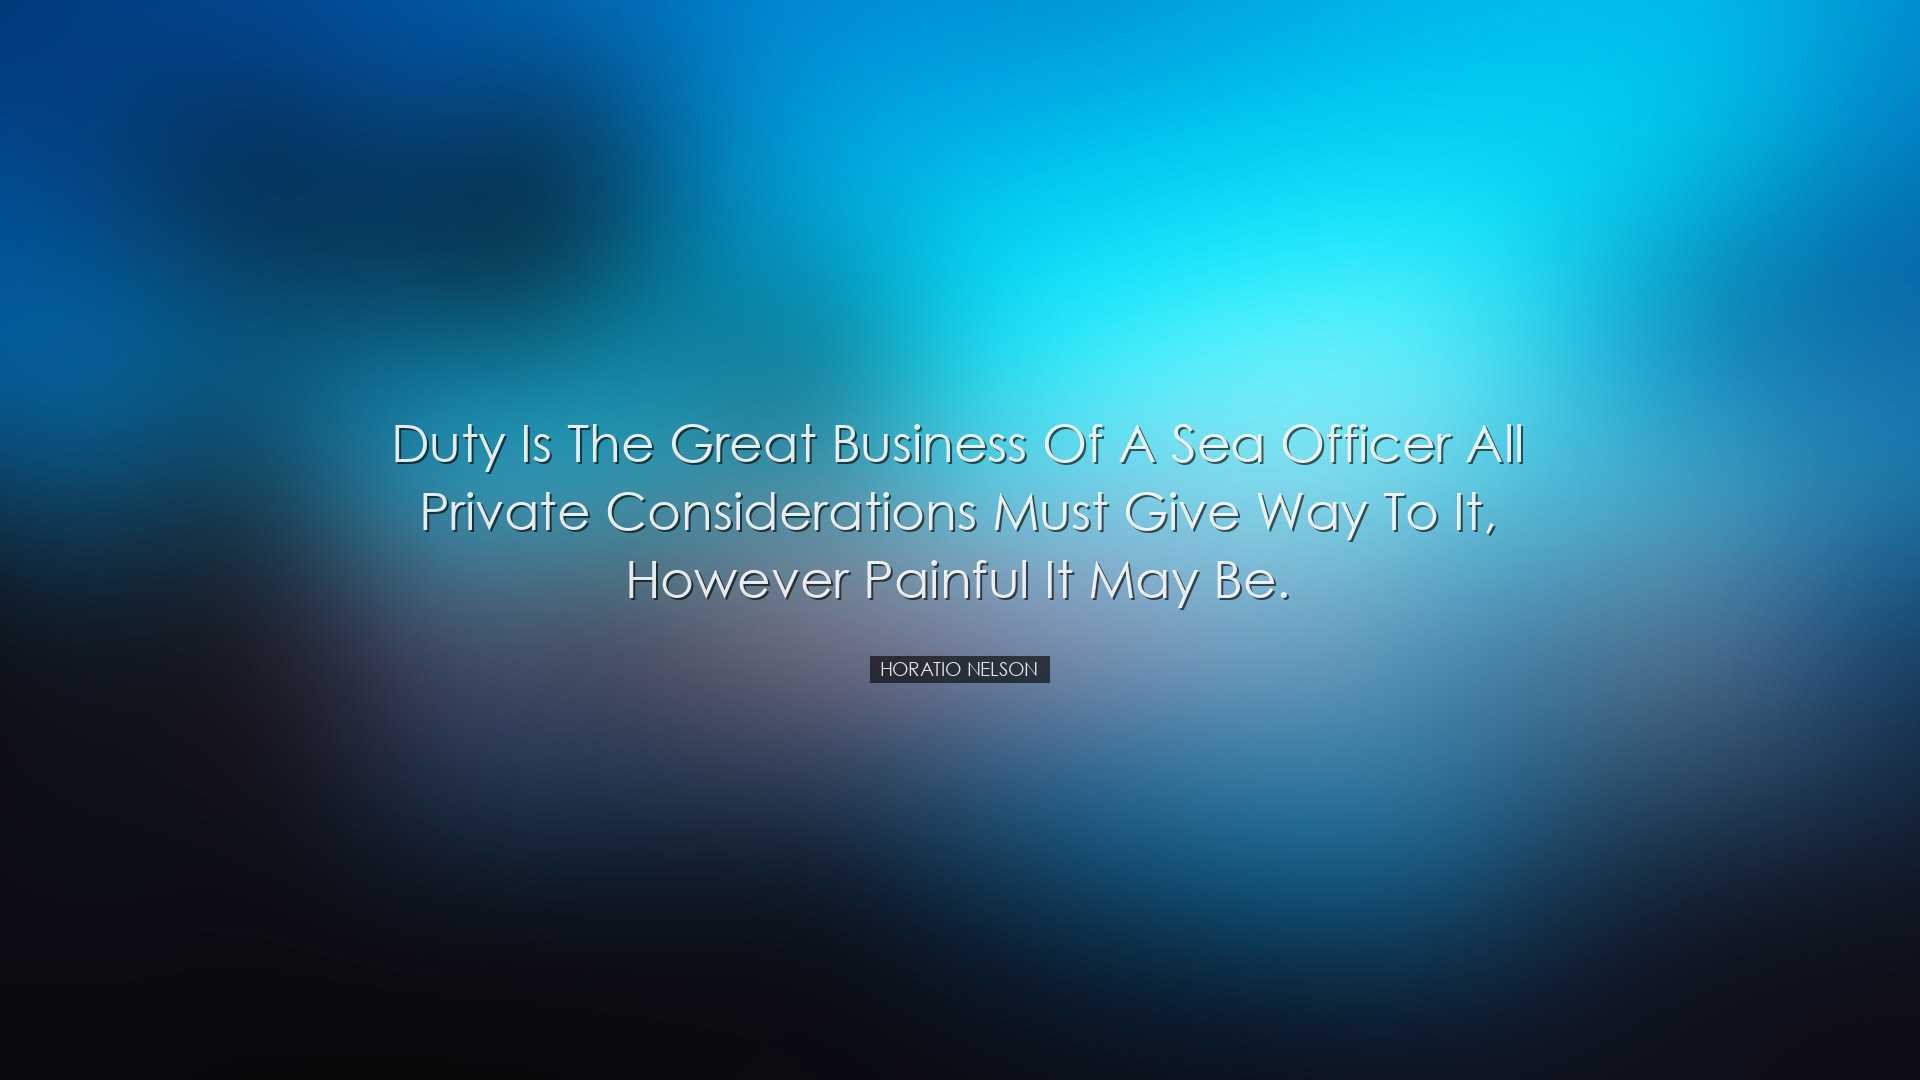 Duty is the great business of a sea officer all private considerat